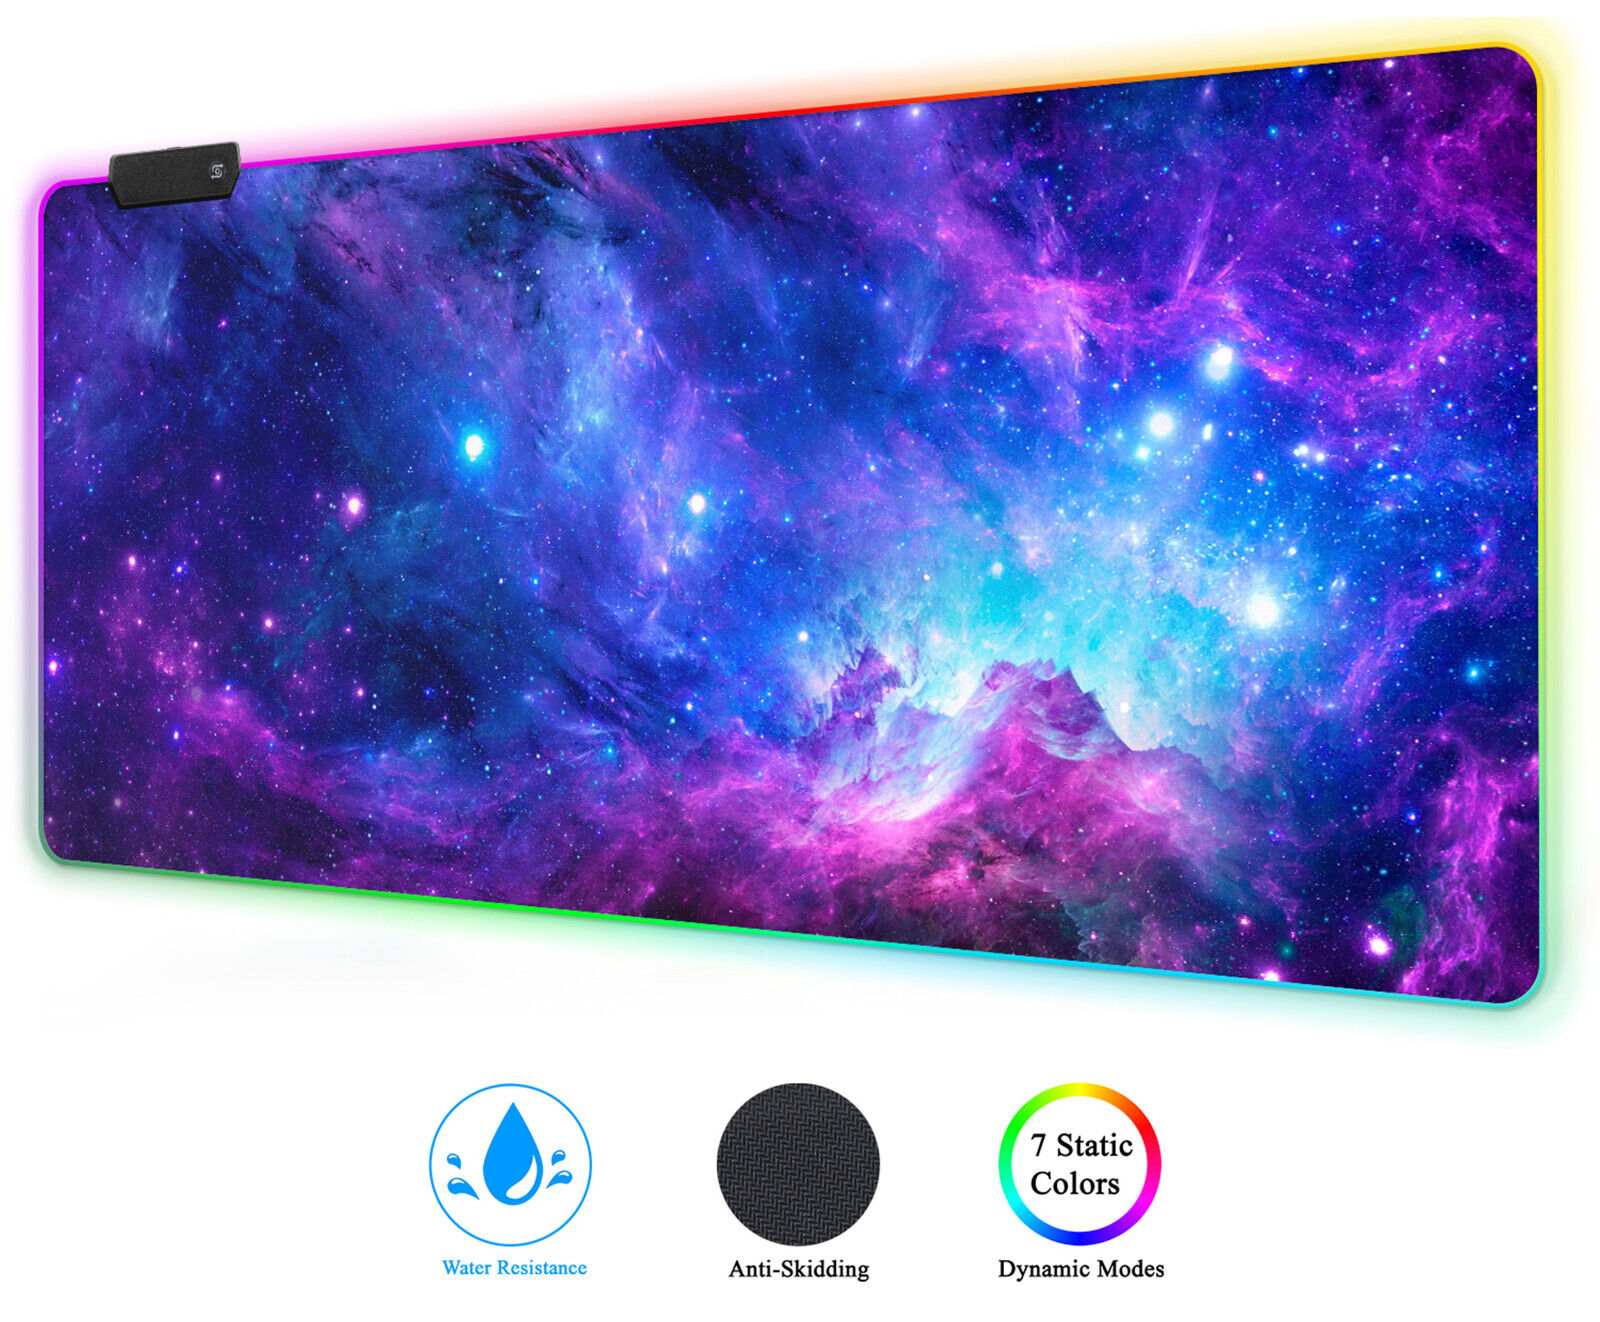 XXL RGB Gaming Mouse Pad - Extended Large LED Gaming Desk Mat (35.4 x 15.7 Inch)